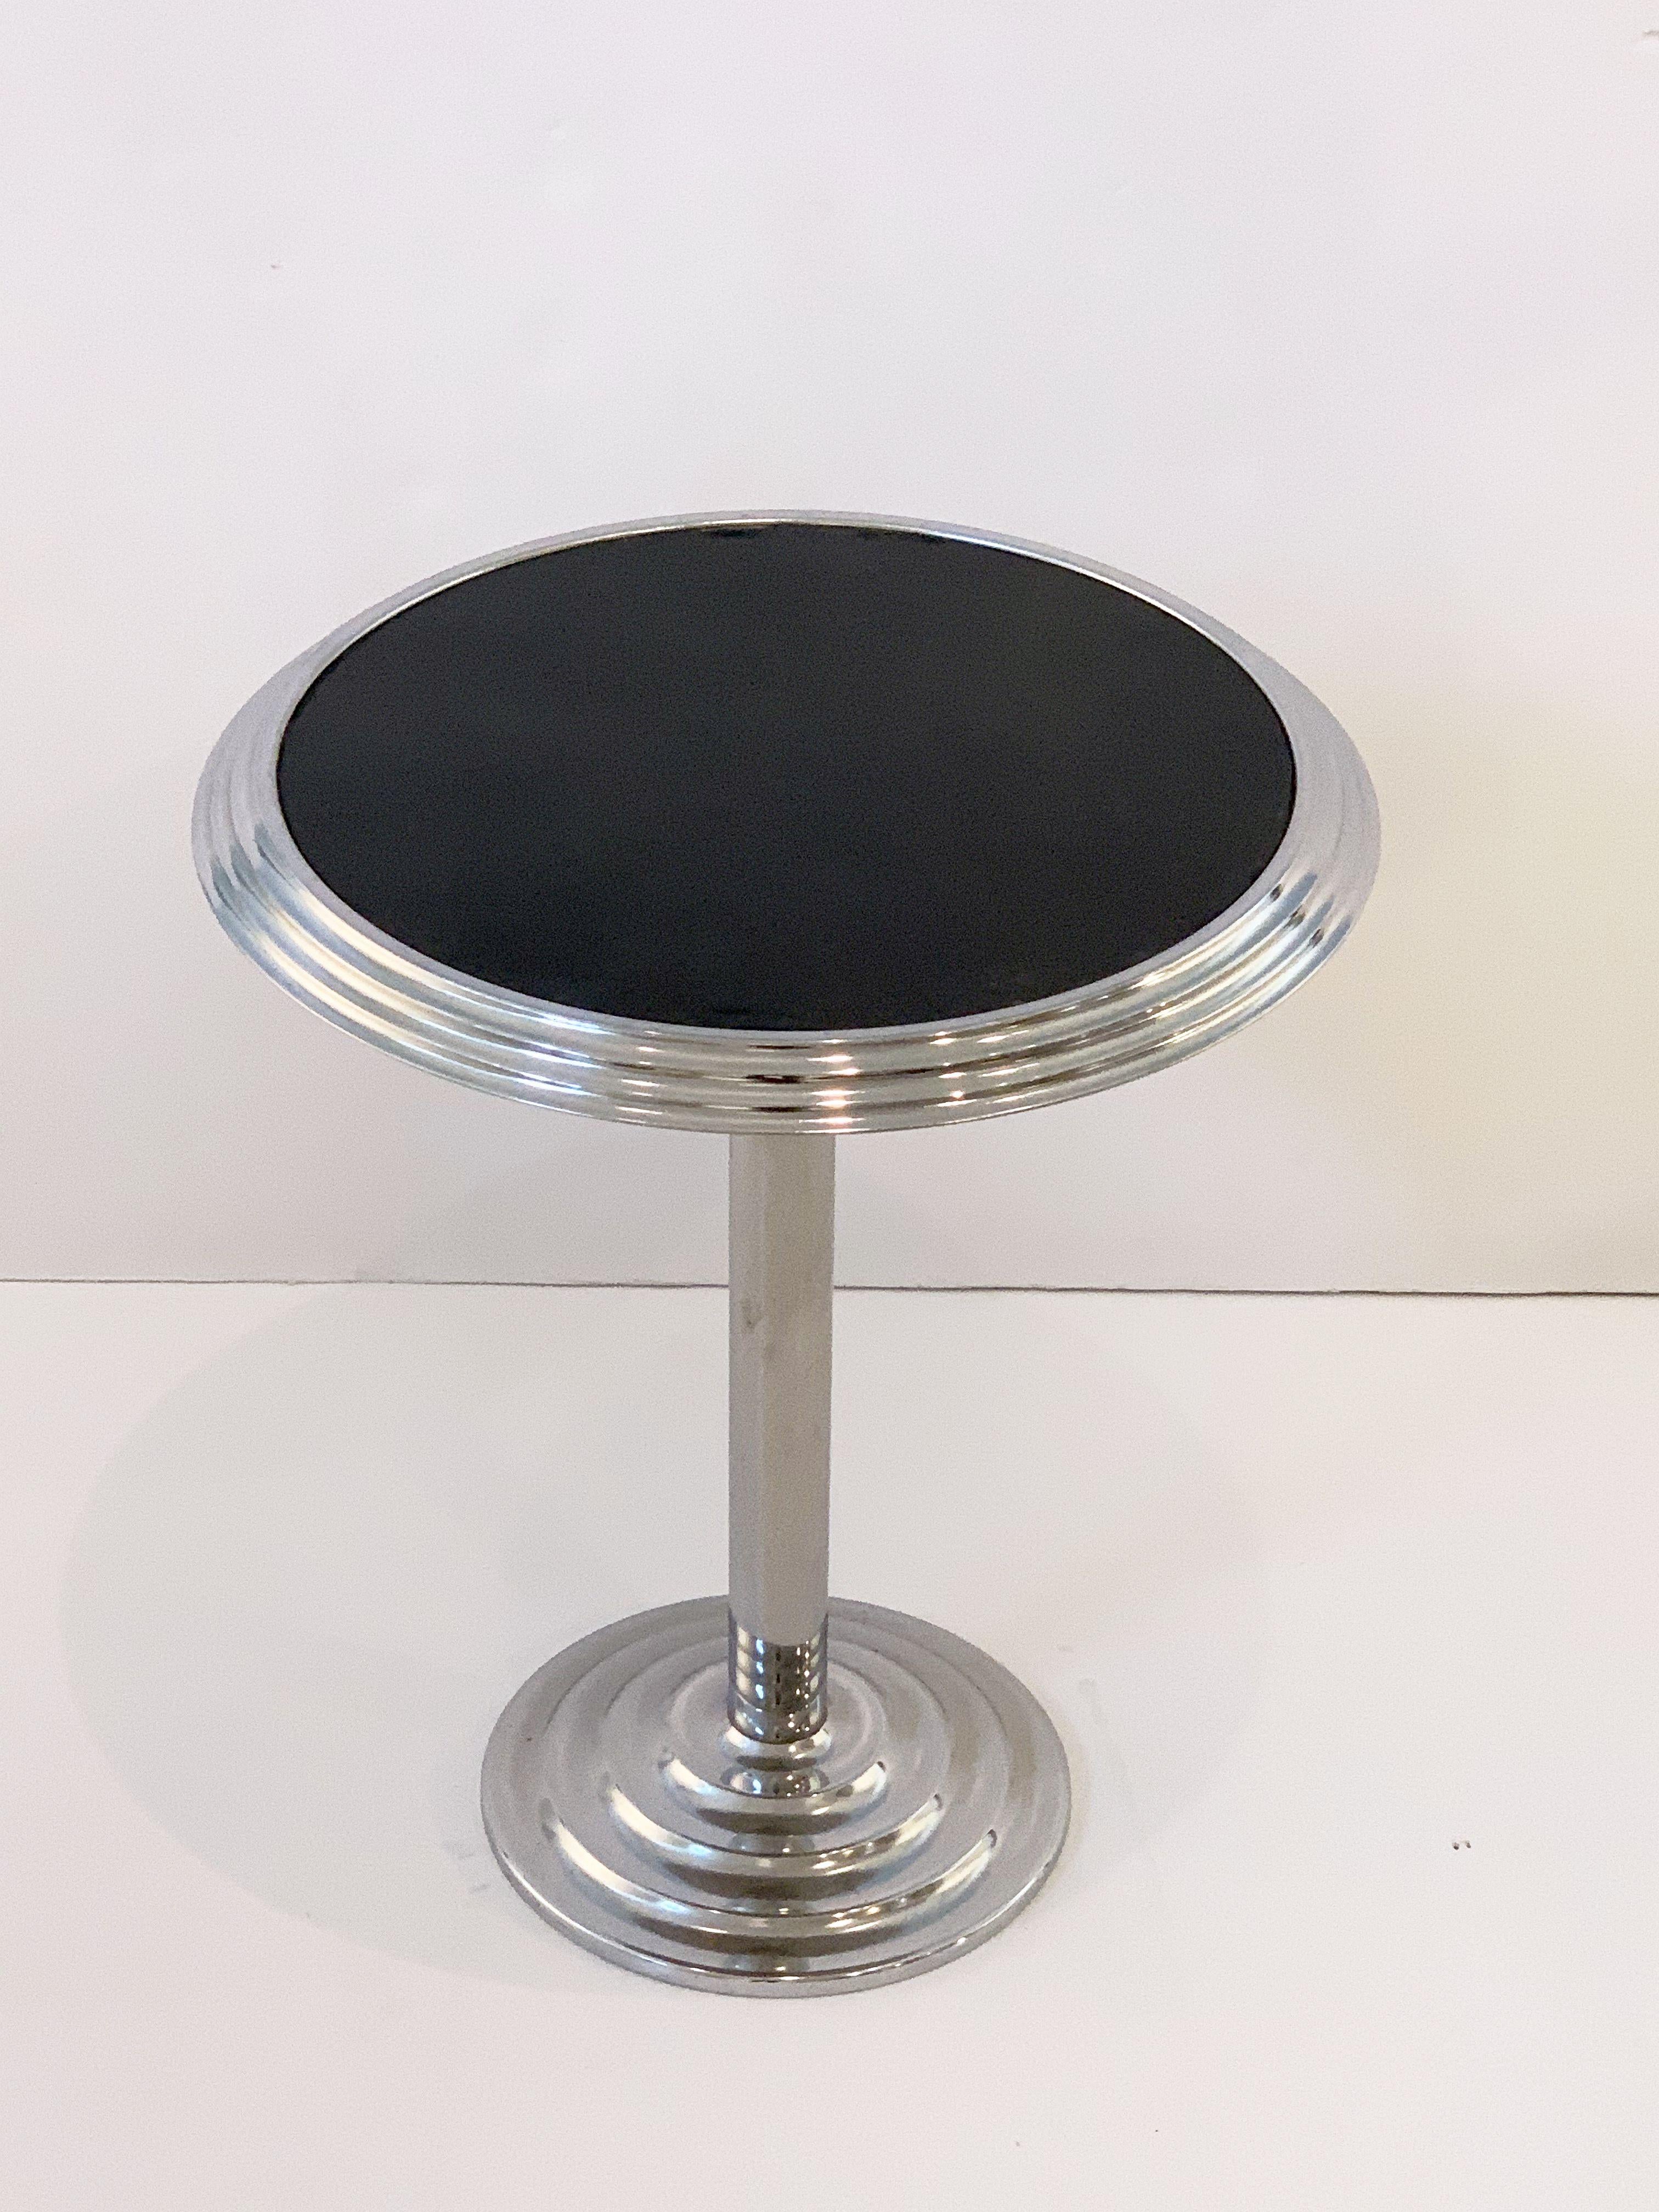 French Art Deco Round Table of Chrome with Enameled Top from France